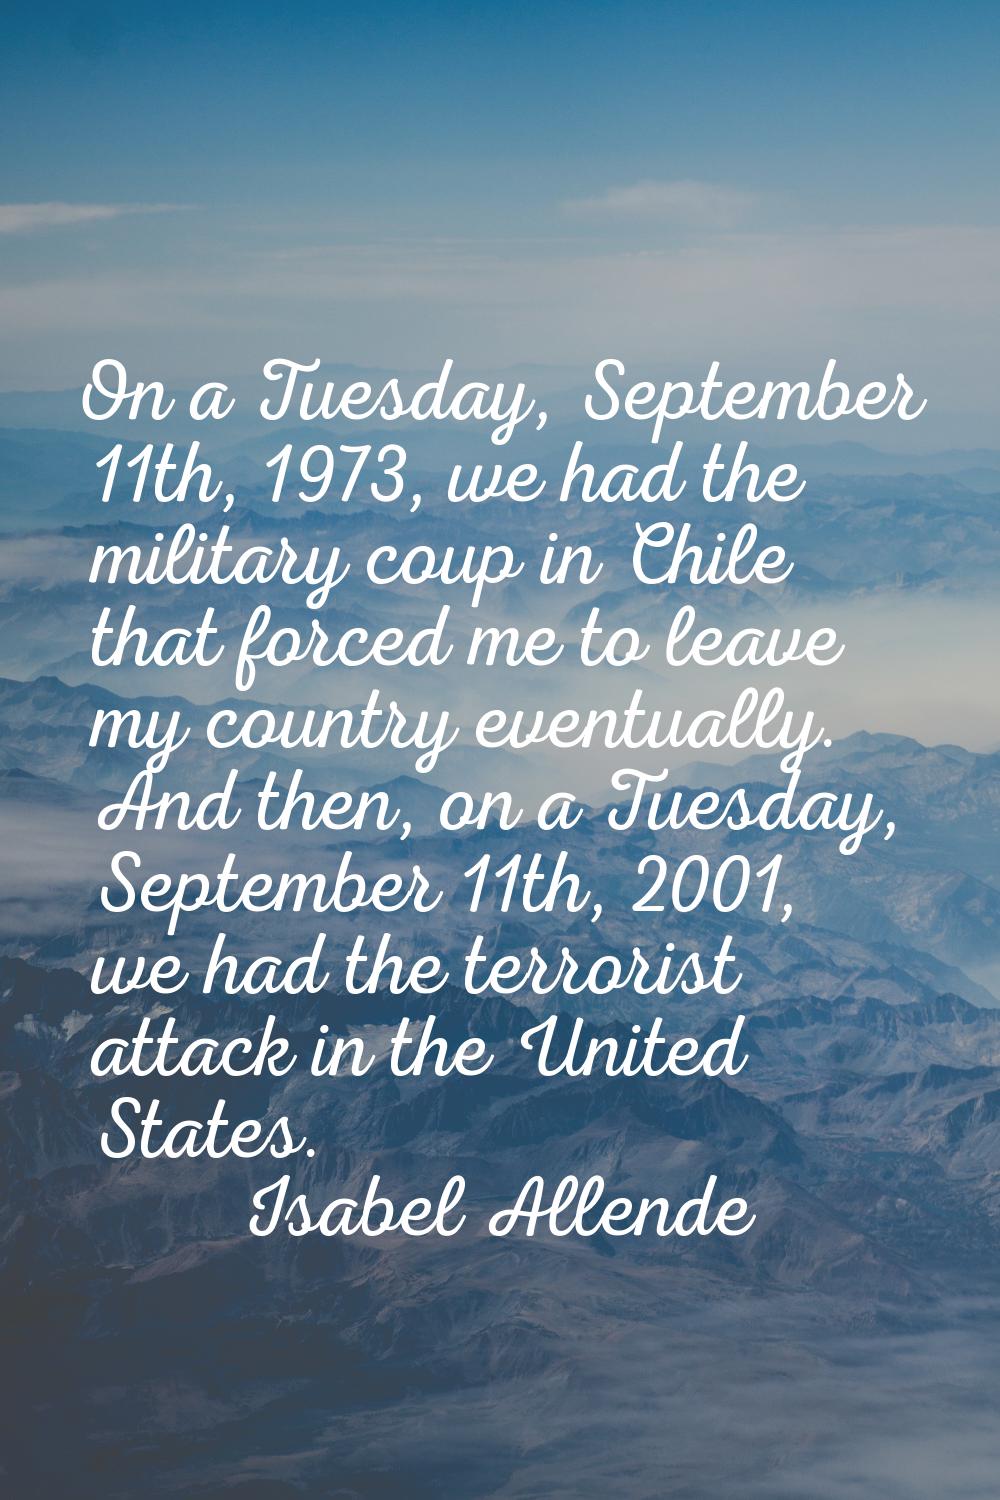 On a Tuesday, September 11th, 1973, we had the military coup in Chile that forced me to leave my co